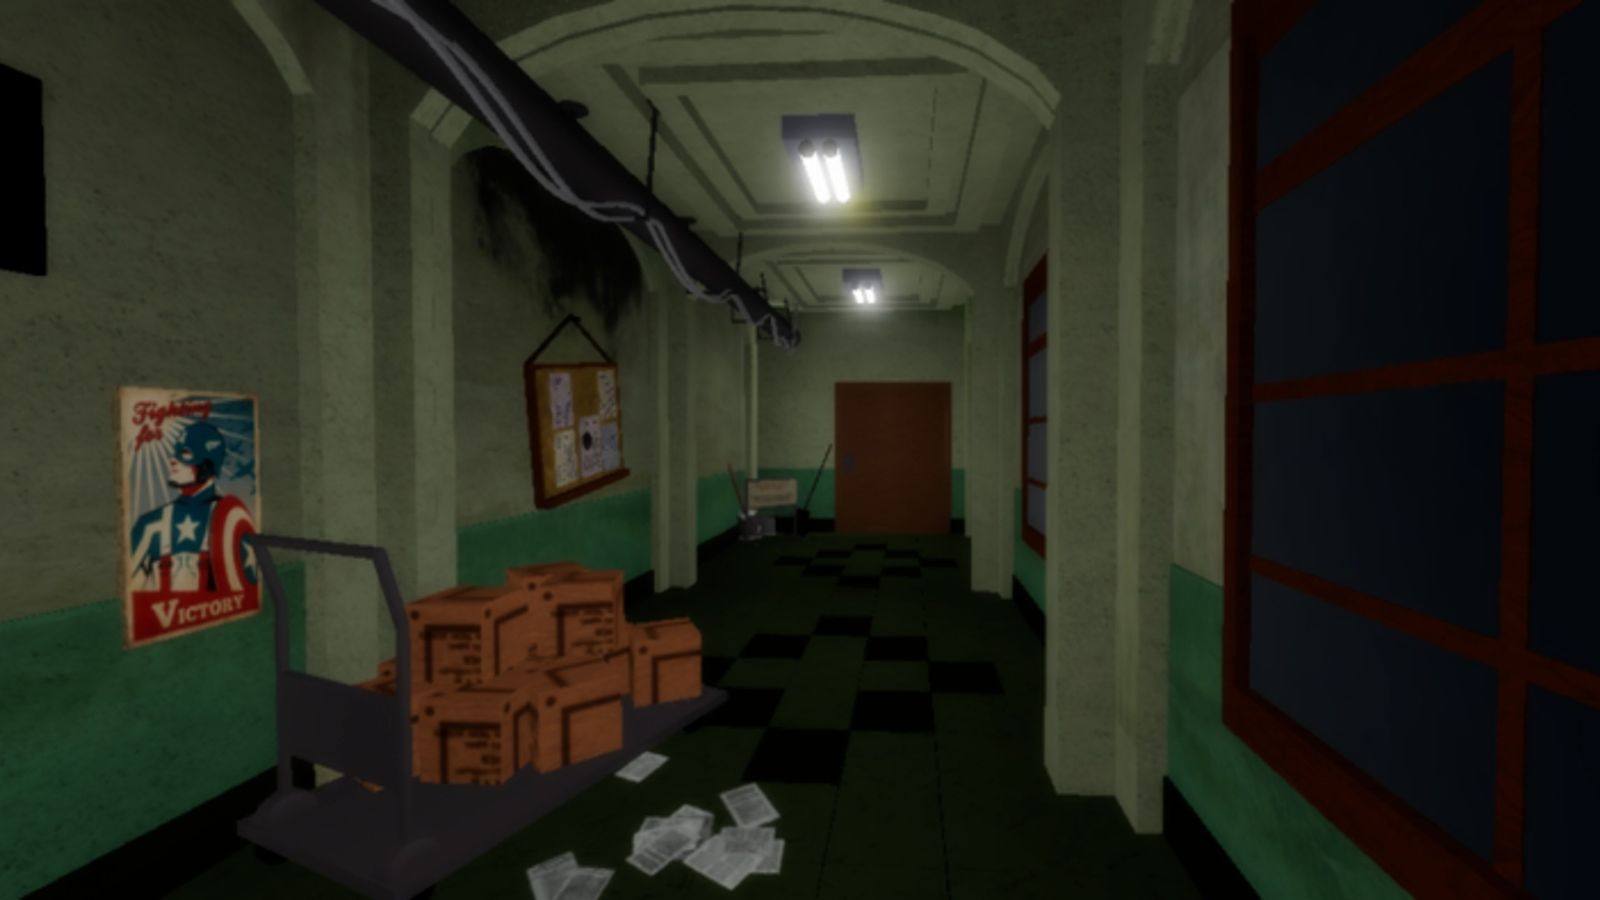 Screenshot from Resident Evil 2 on Roblox, showing the RPD hallways in Roblox form